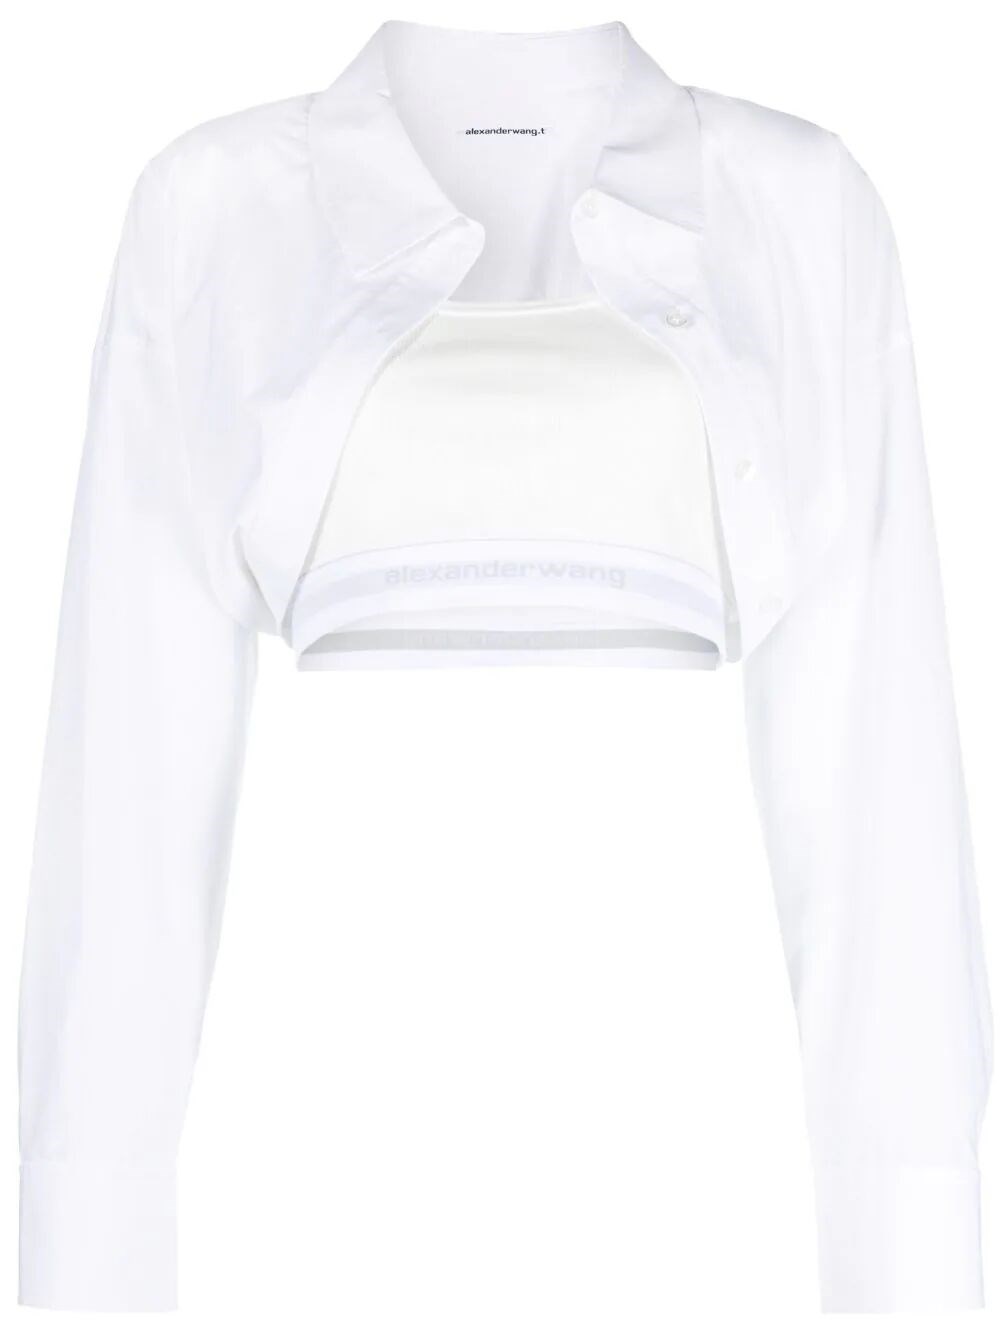 Alexander Wang Layered Cropped Shirt In White